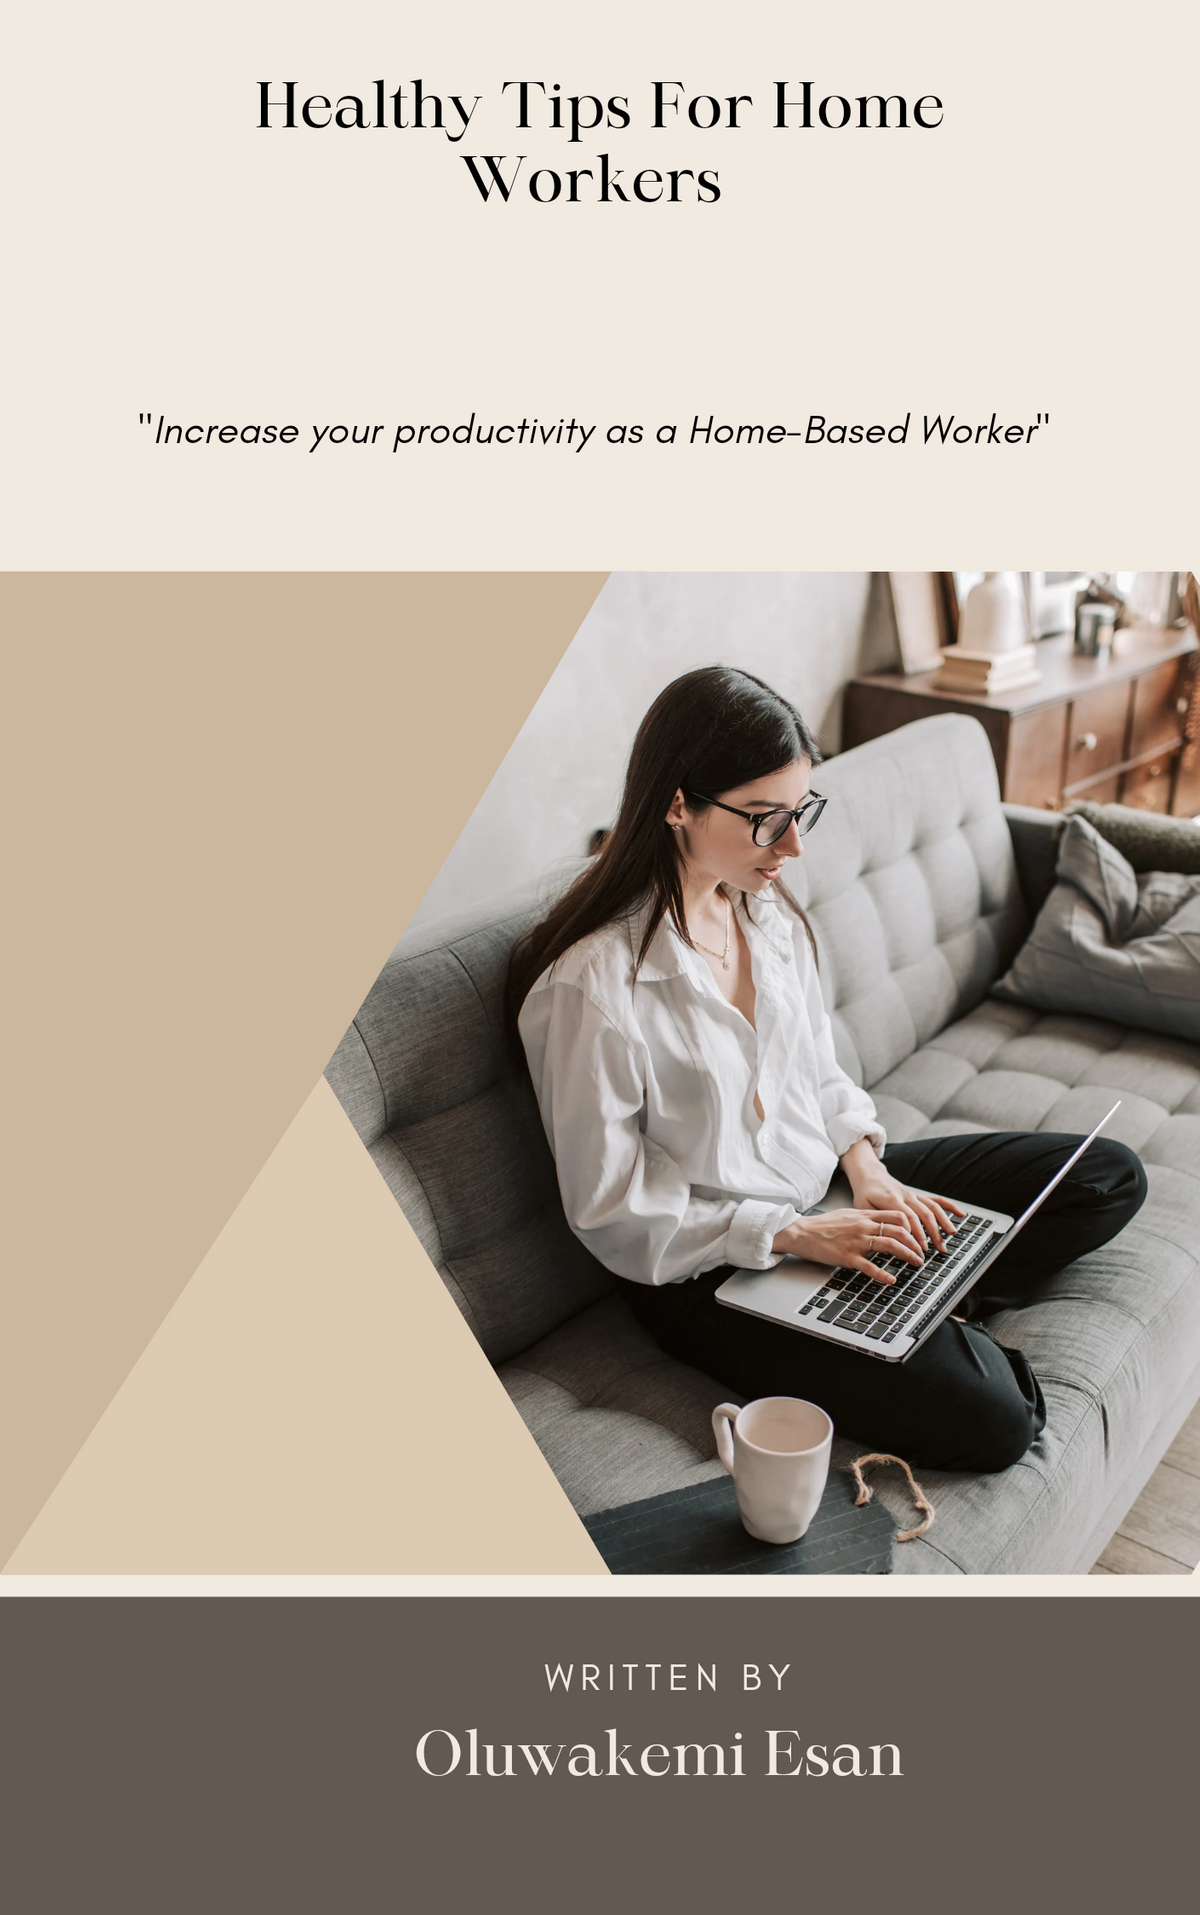 Have a sound physical and mental health while you work from home 